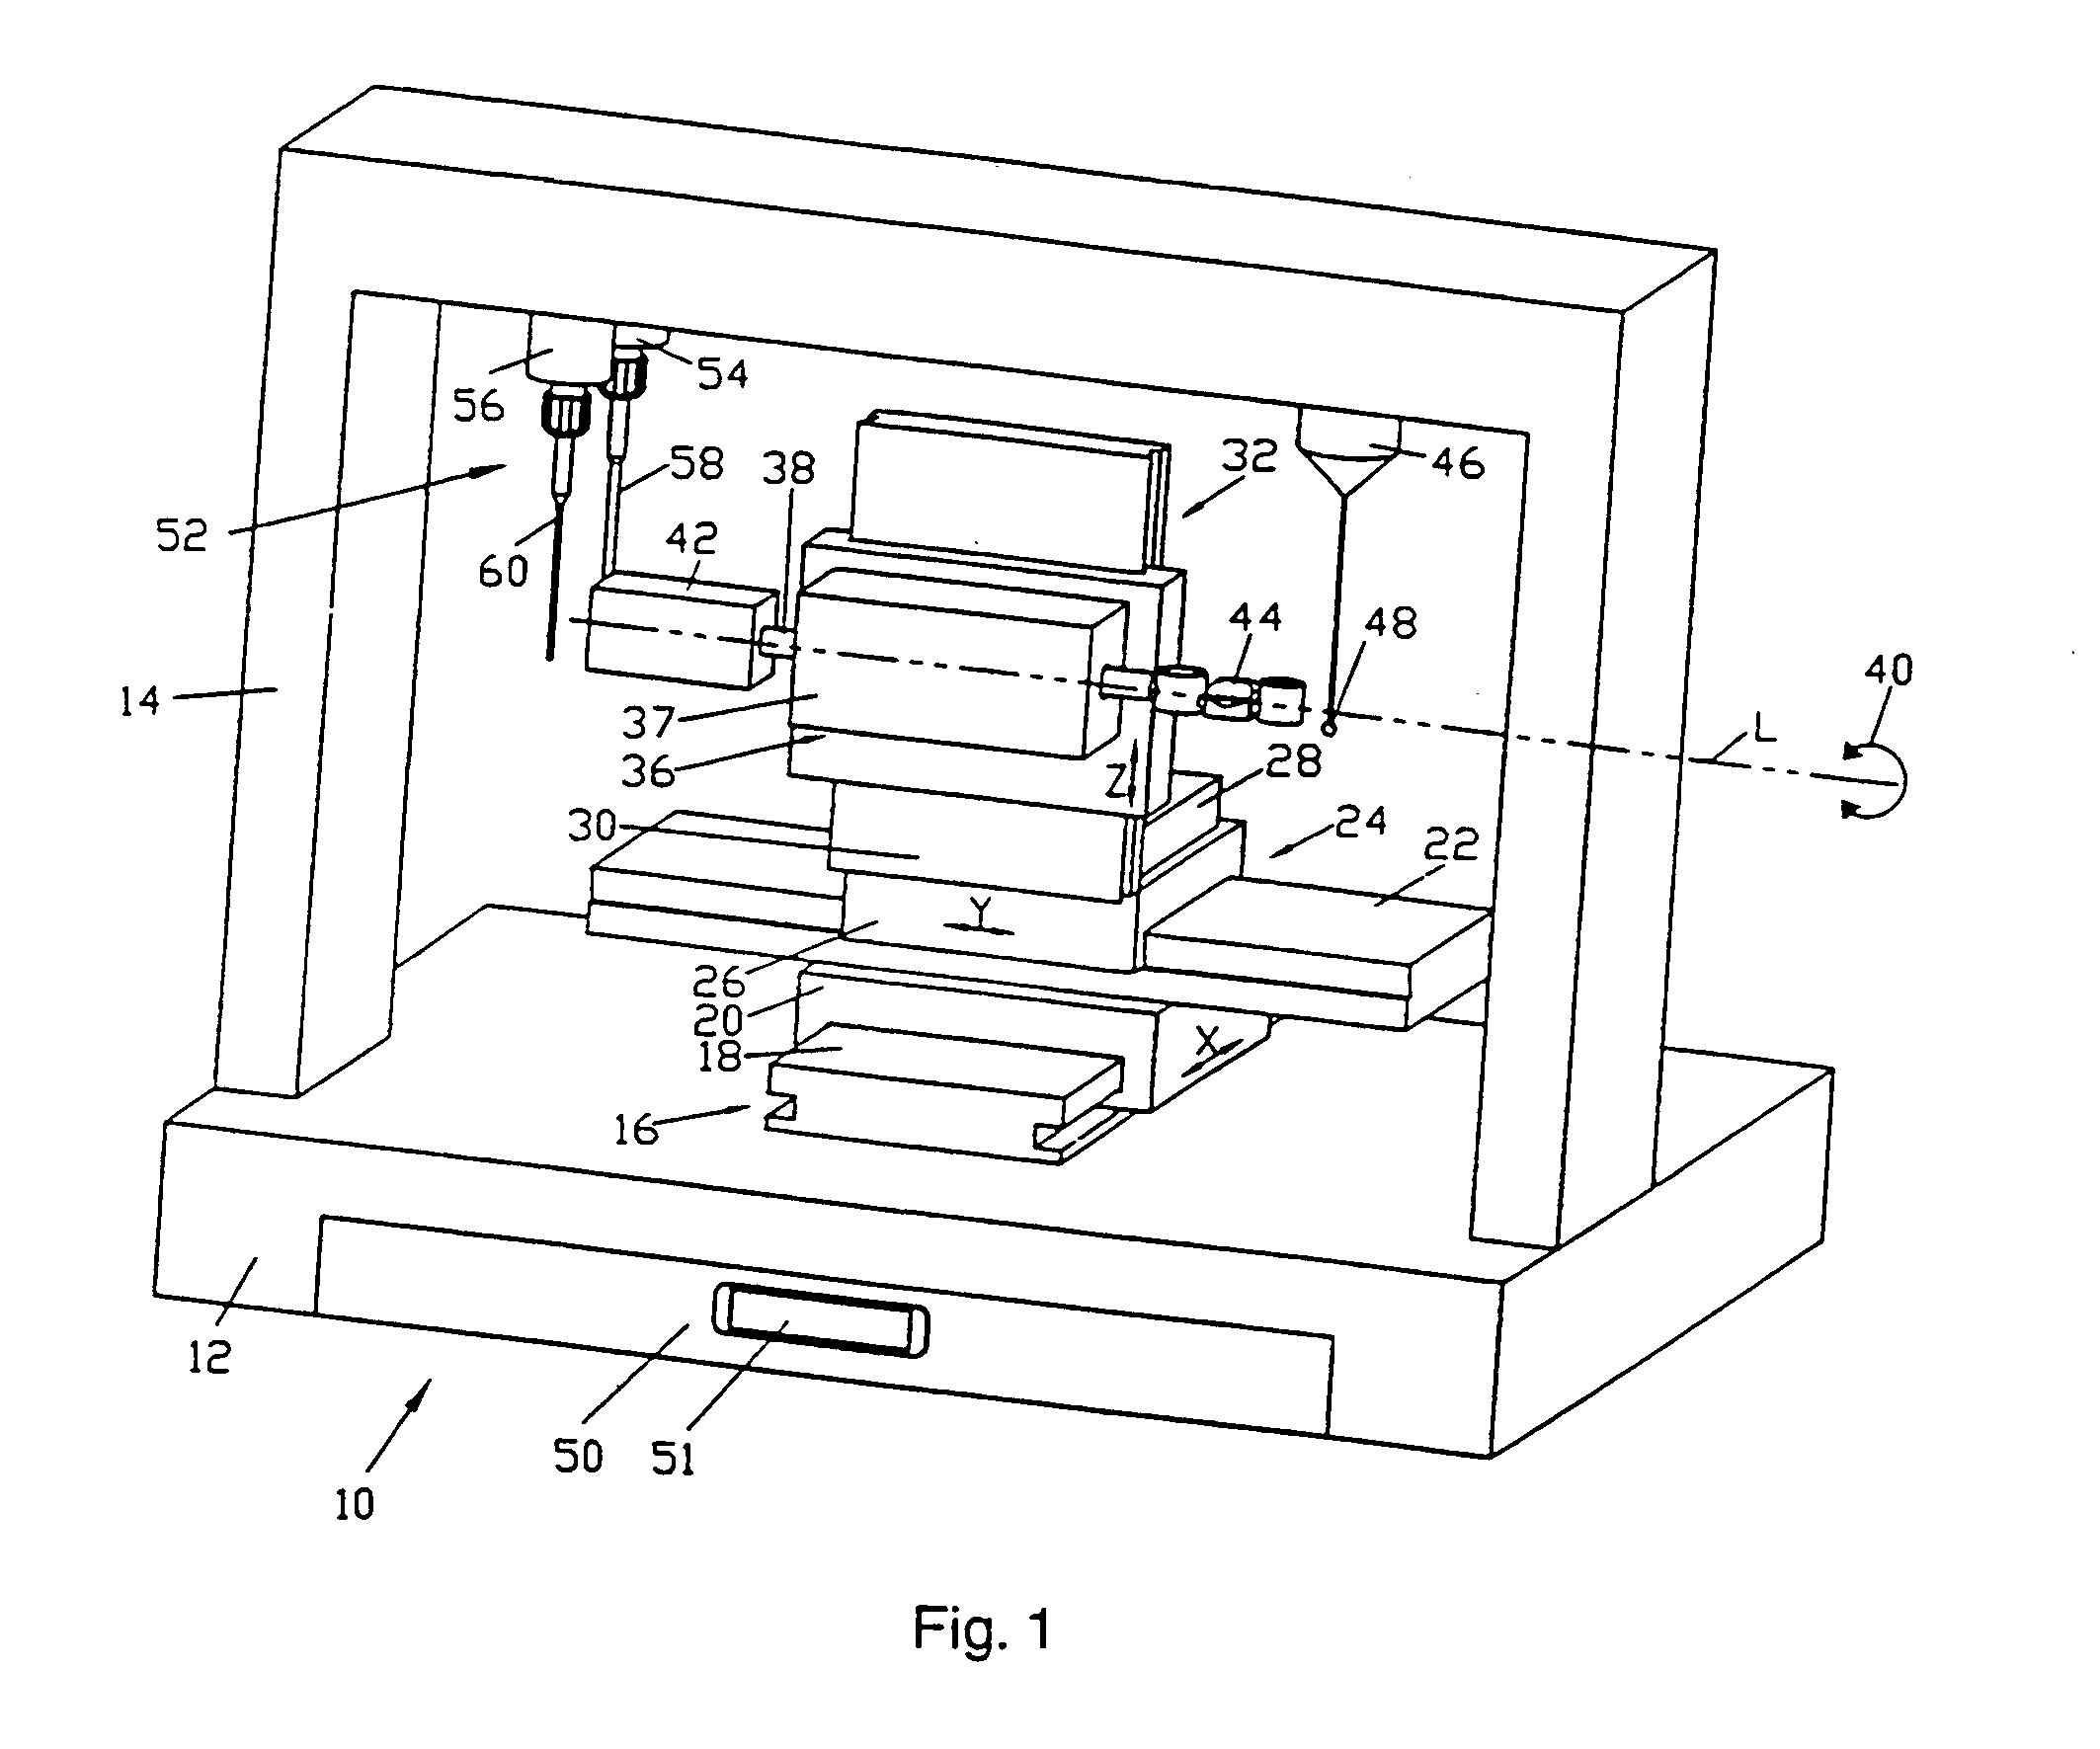 Machine tool for the production of base structures for false teeth